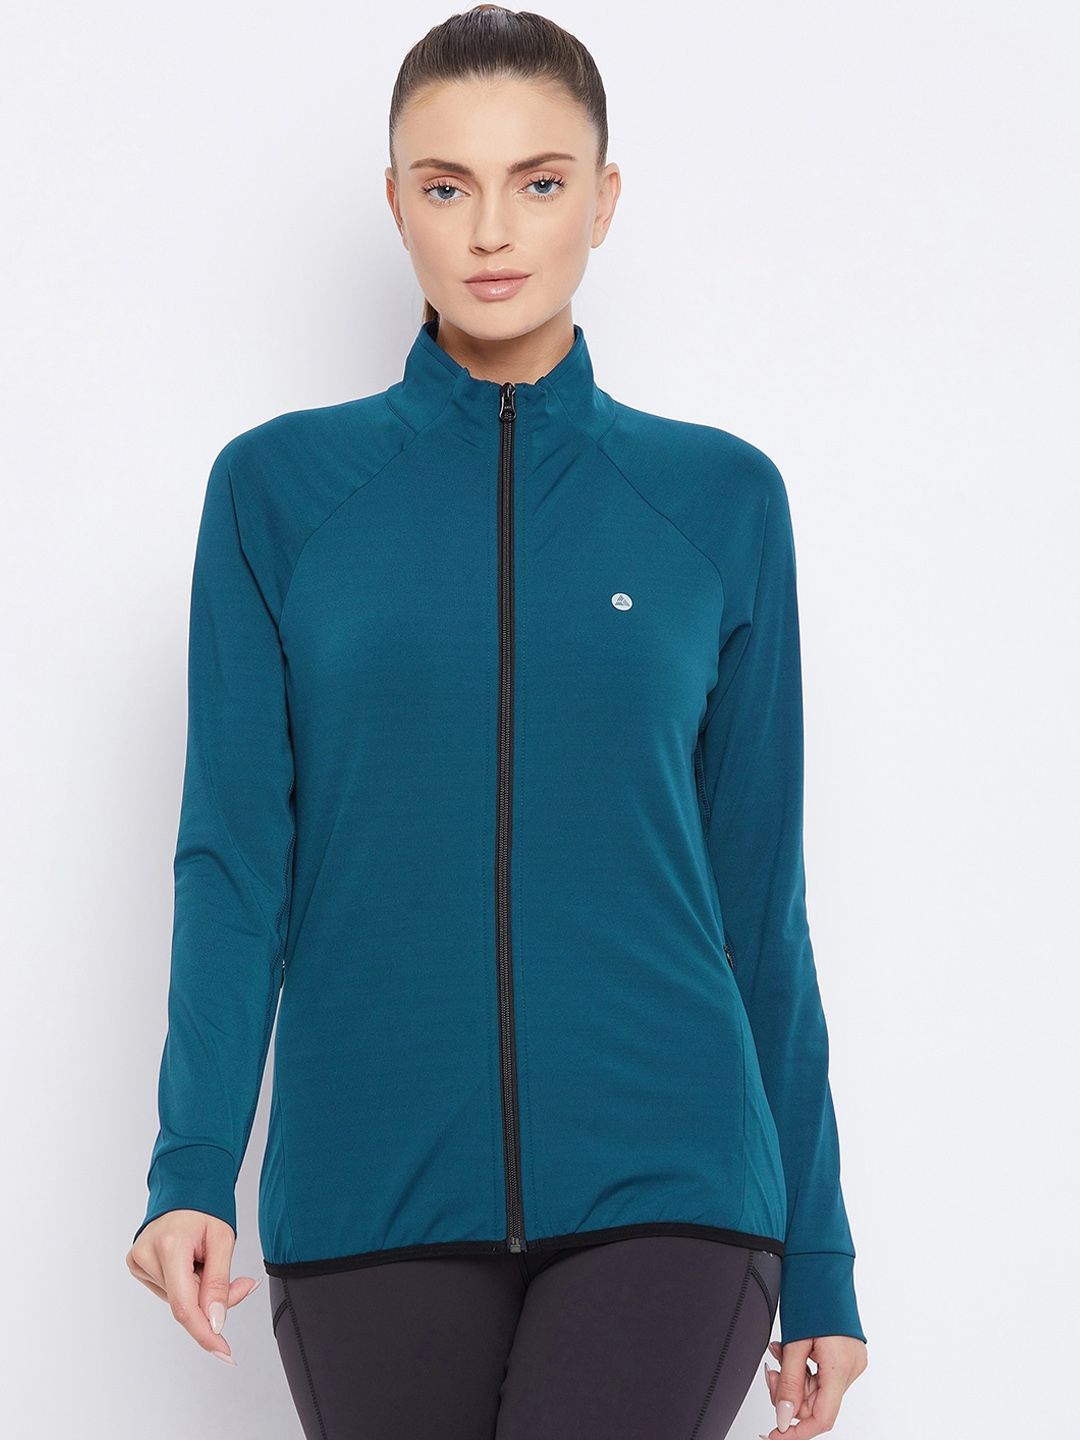 ATHLISIS Women Teal Blue Reflective Strip Training or Gym Sporty Jacket Price in India